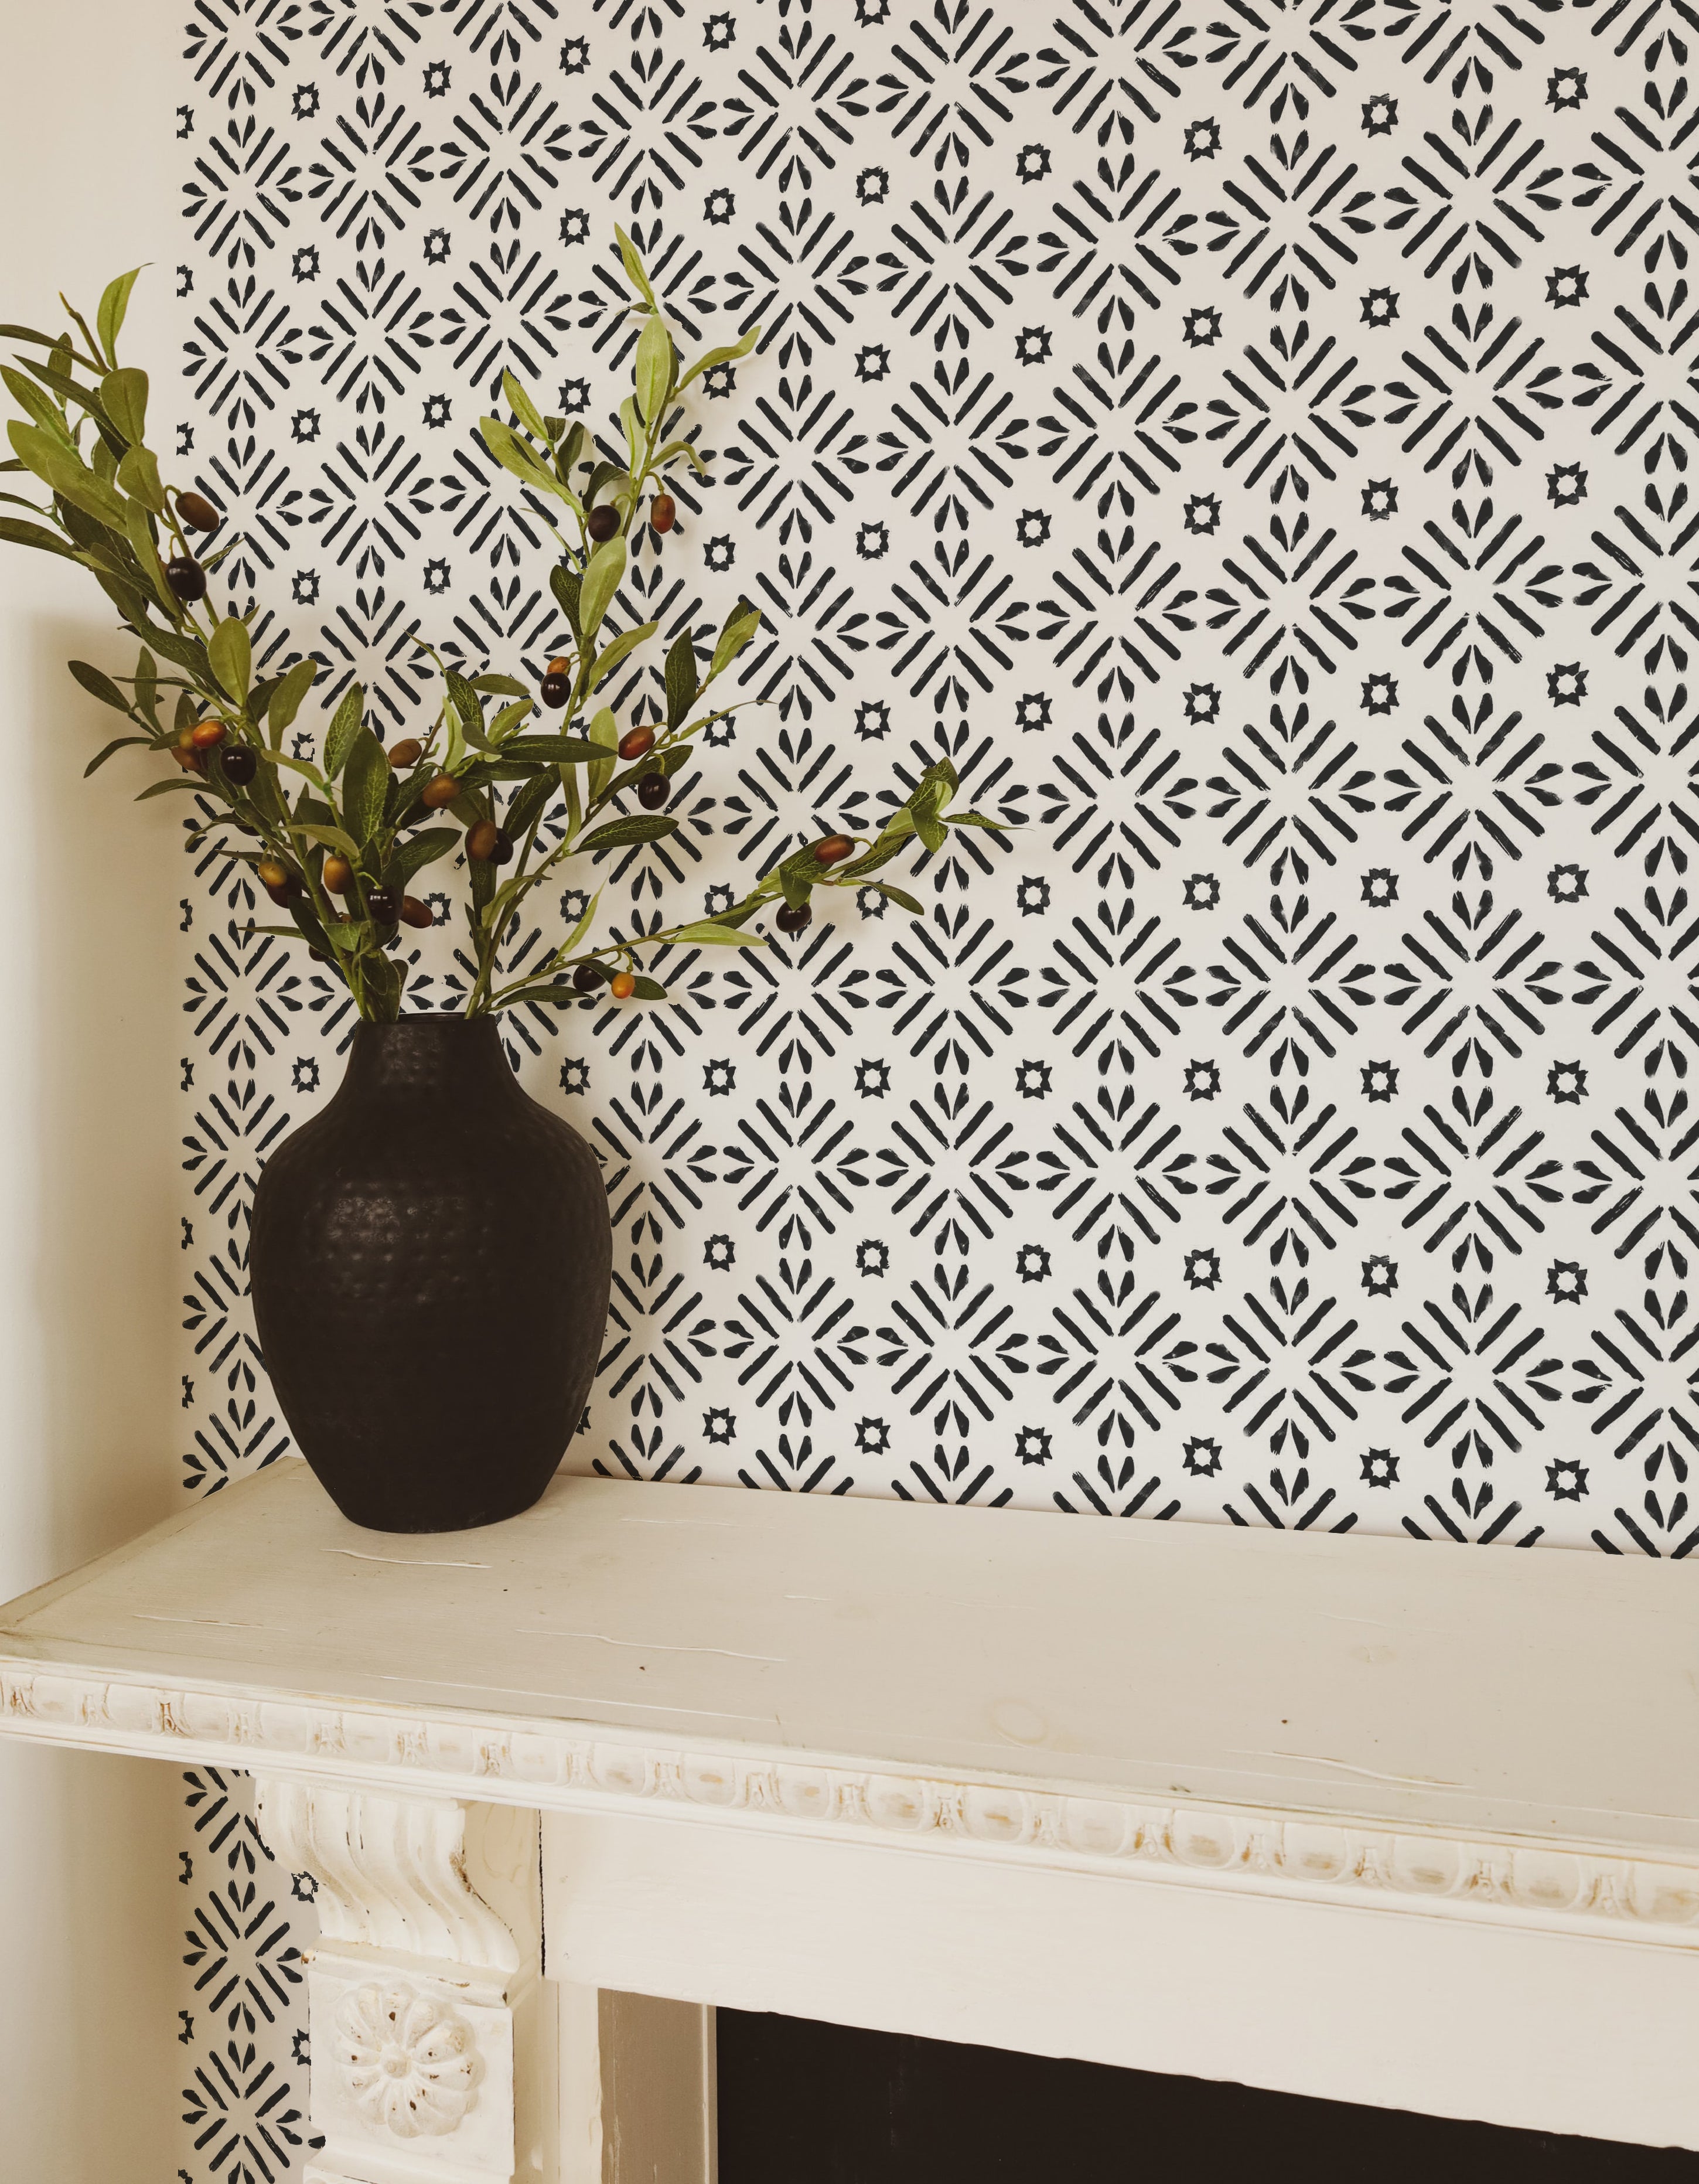 Elegant entryway decorated with Geometric Wallpaper III - Black, featuring a black vase with greenery against the striking black and white patterned wallpaper